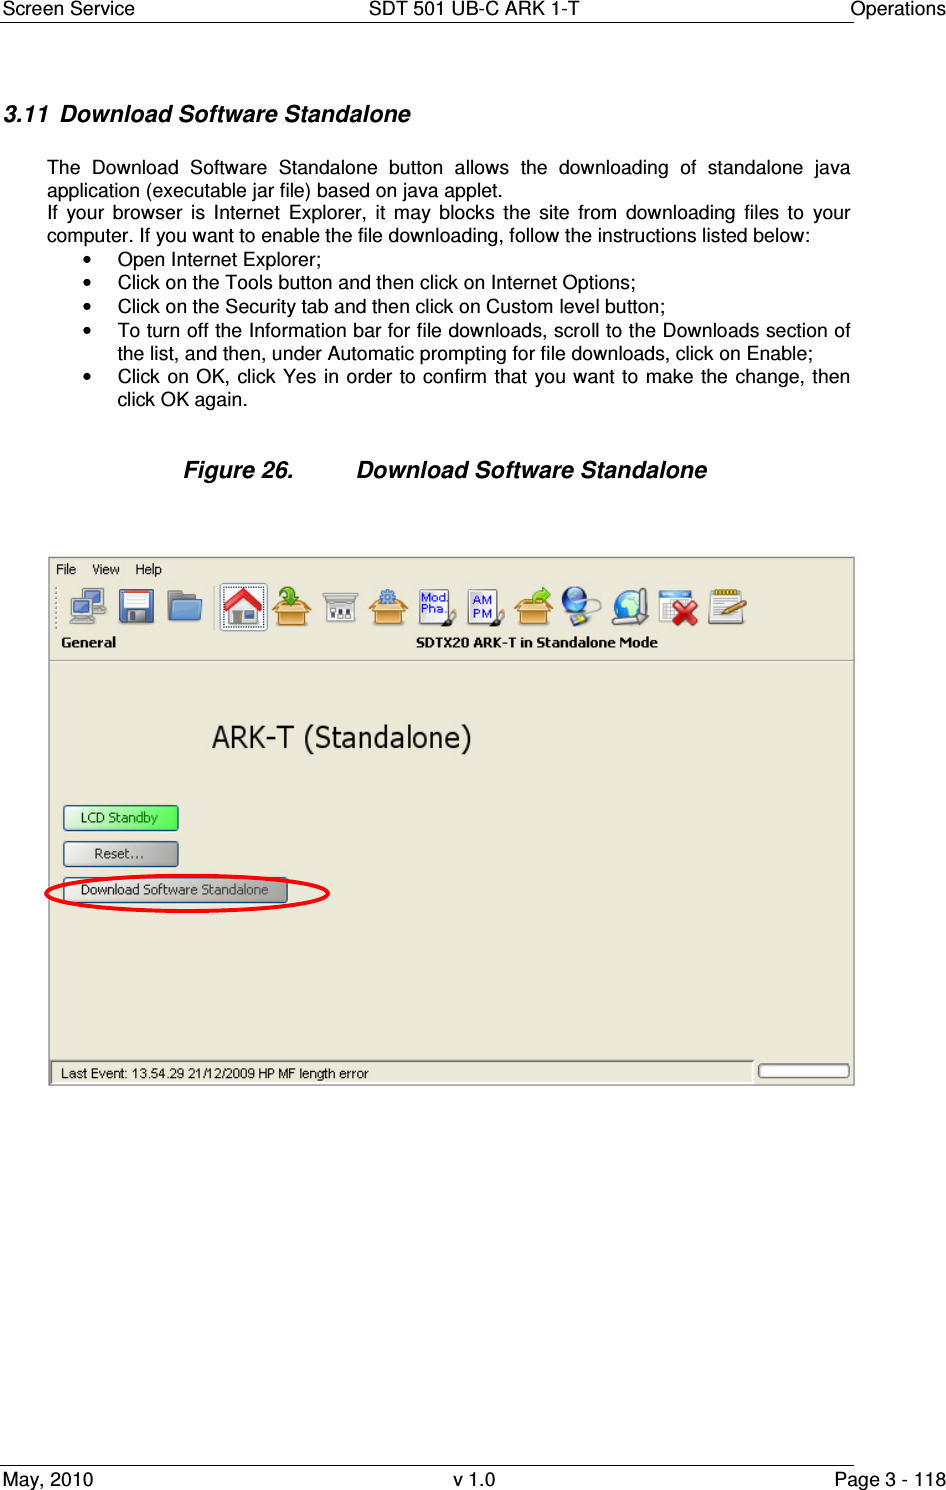 Screen Service  SDT 501 UB-C ARK 1-T  Operations May, 2010  v 1.0  Page 3 - 118 3.11  Download Software Standalone  The  Download  Software  Standalone  button  allows  the  downloading  of  standalone  java application (executable jar file) based on java applet. If  your  browser  is  Internet  Explorer,  it  may  blocks  the  site  from  downloading  files  to  your computer. If you want to enable the file downloading, follow the instructions listed below: •  Open Internet Explorer; •  Click on the Tools button and then click on Internet Options; •  Click on the Security tab and then click on Custom level button; •  To turn off the Information bar for file downloads, scroll to the Downloads section of the list, and then, under Automatic prompting for file downloads, click on Enable; •  Click on OK, click  Yes in order to confirm that  you want  to make  the change, then click OK again.  Figure 26.  Download Software Standalone                  